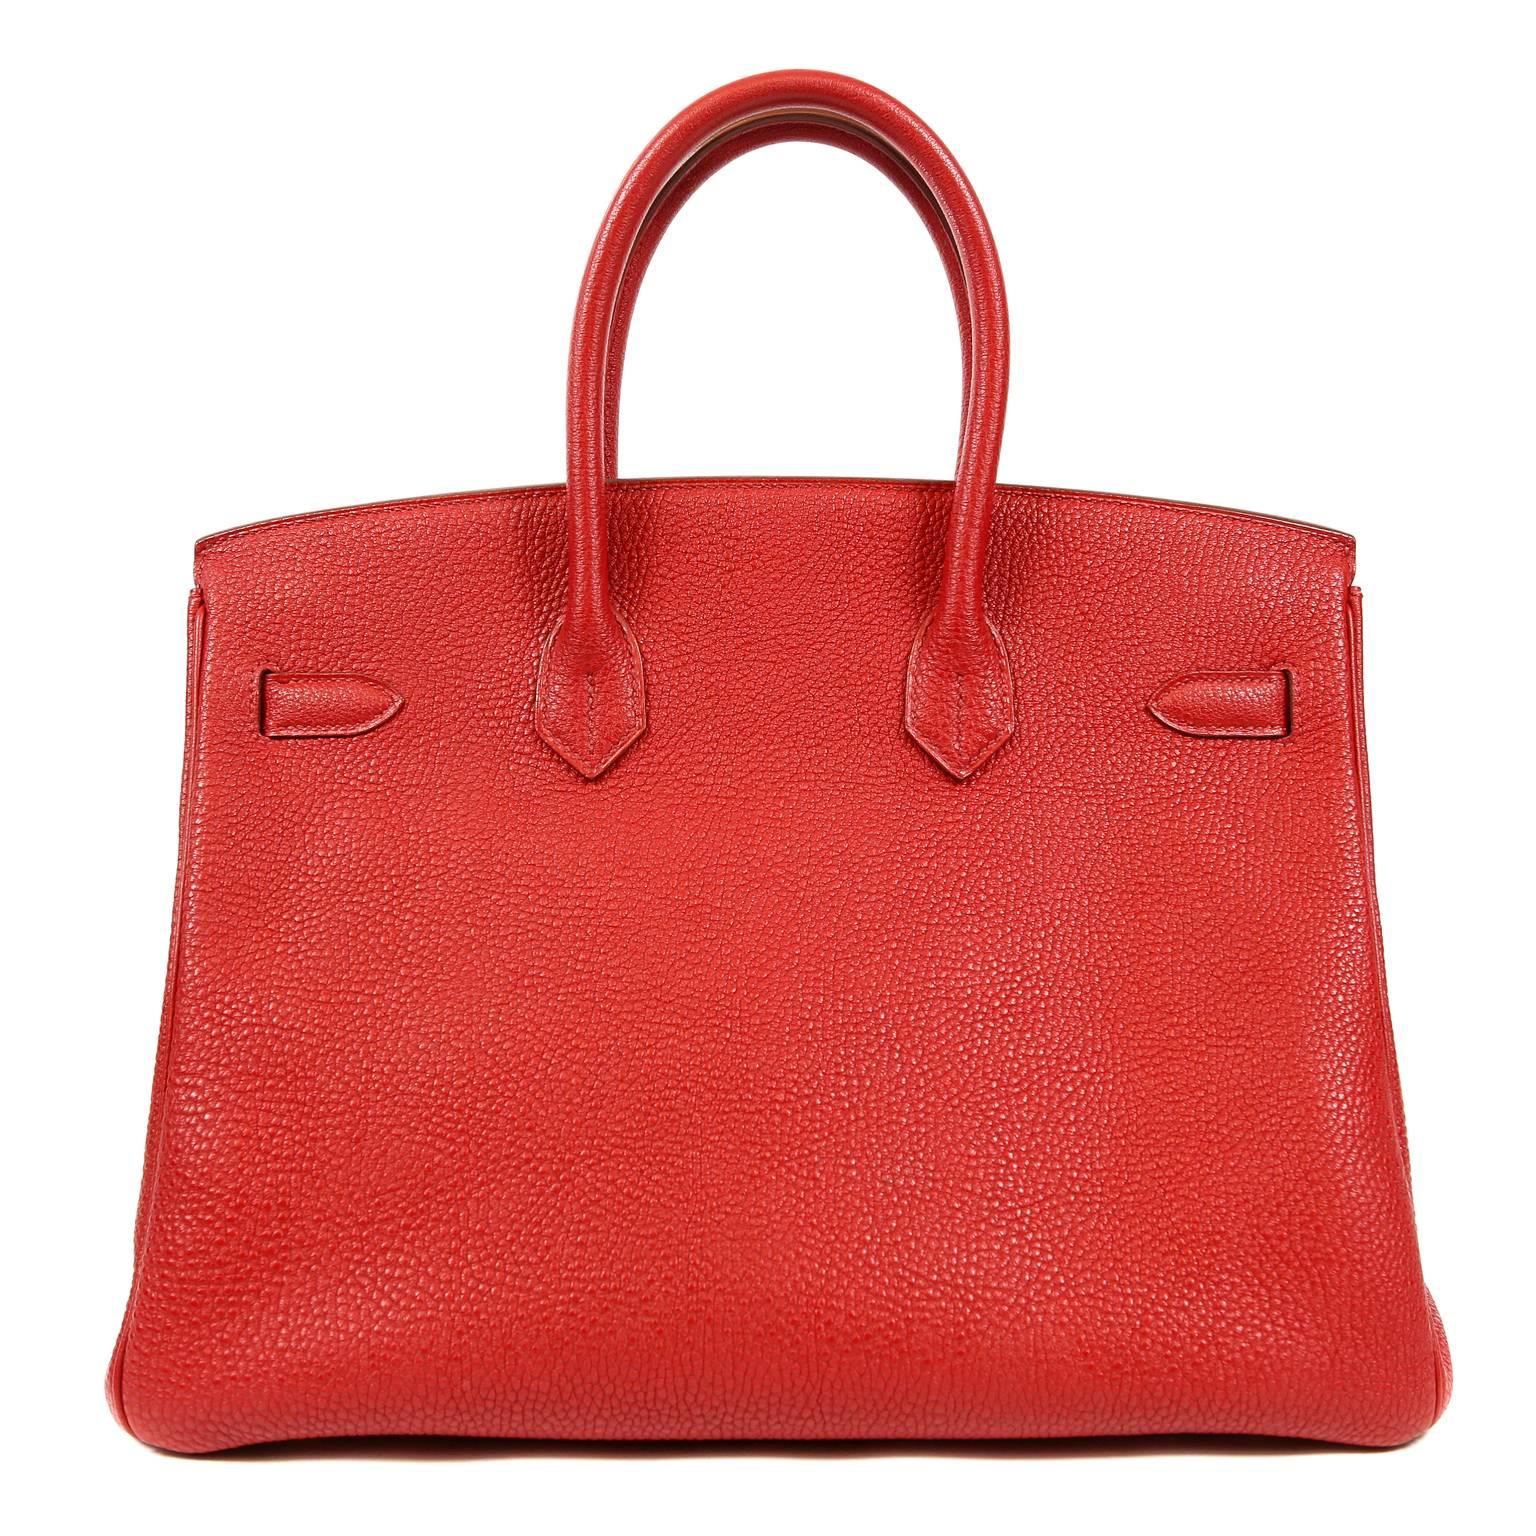 Hermès Rouge H Togo Leather Horseshoe Birkin- Pristine.  Never carried with plastic intact on the hardware.
Waitlists exceeding a year are commonplace for the intensely coveted leather Birkin bag.  Each piece is hand crafted by skilled artisans and